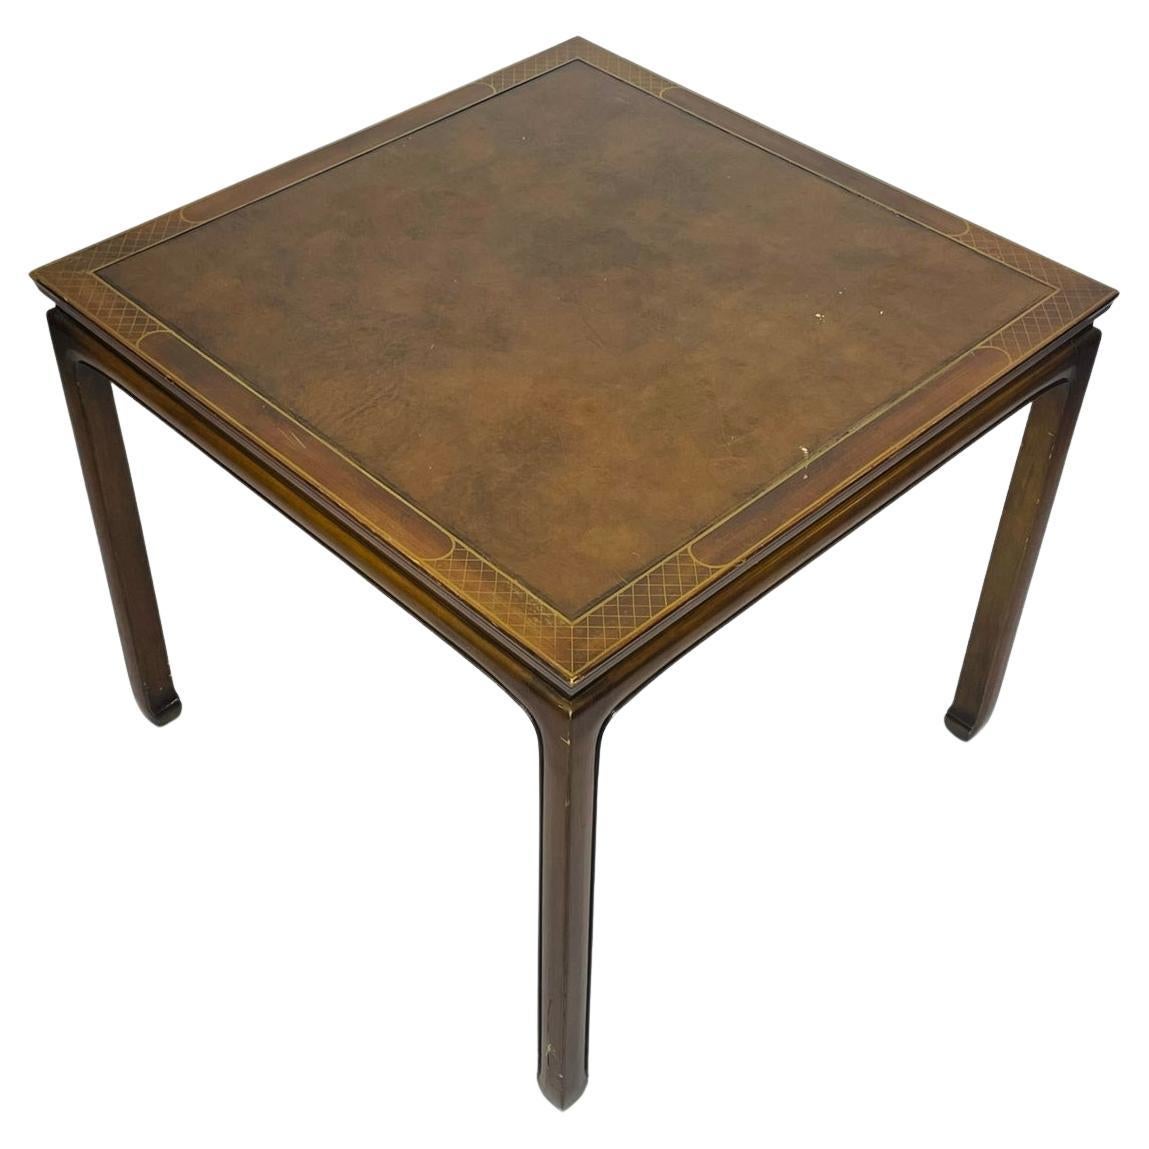 Vintage Game Table With Leather Top by Baker Furniture "Collectors Edition" For Sale